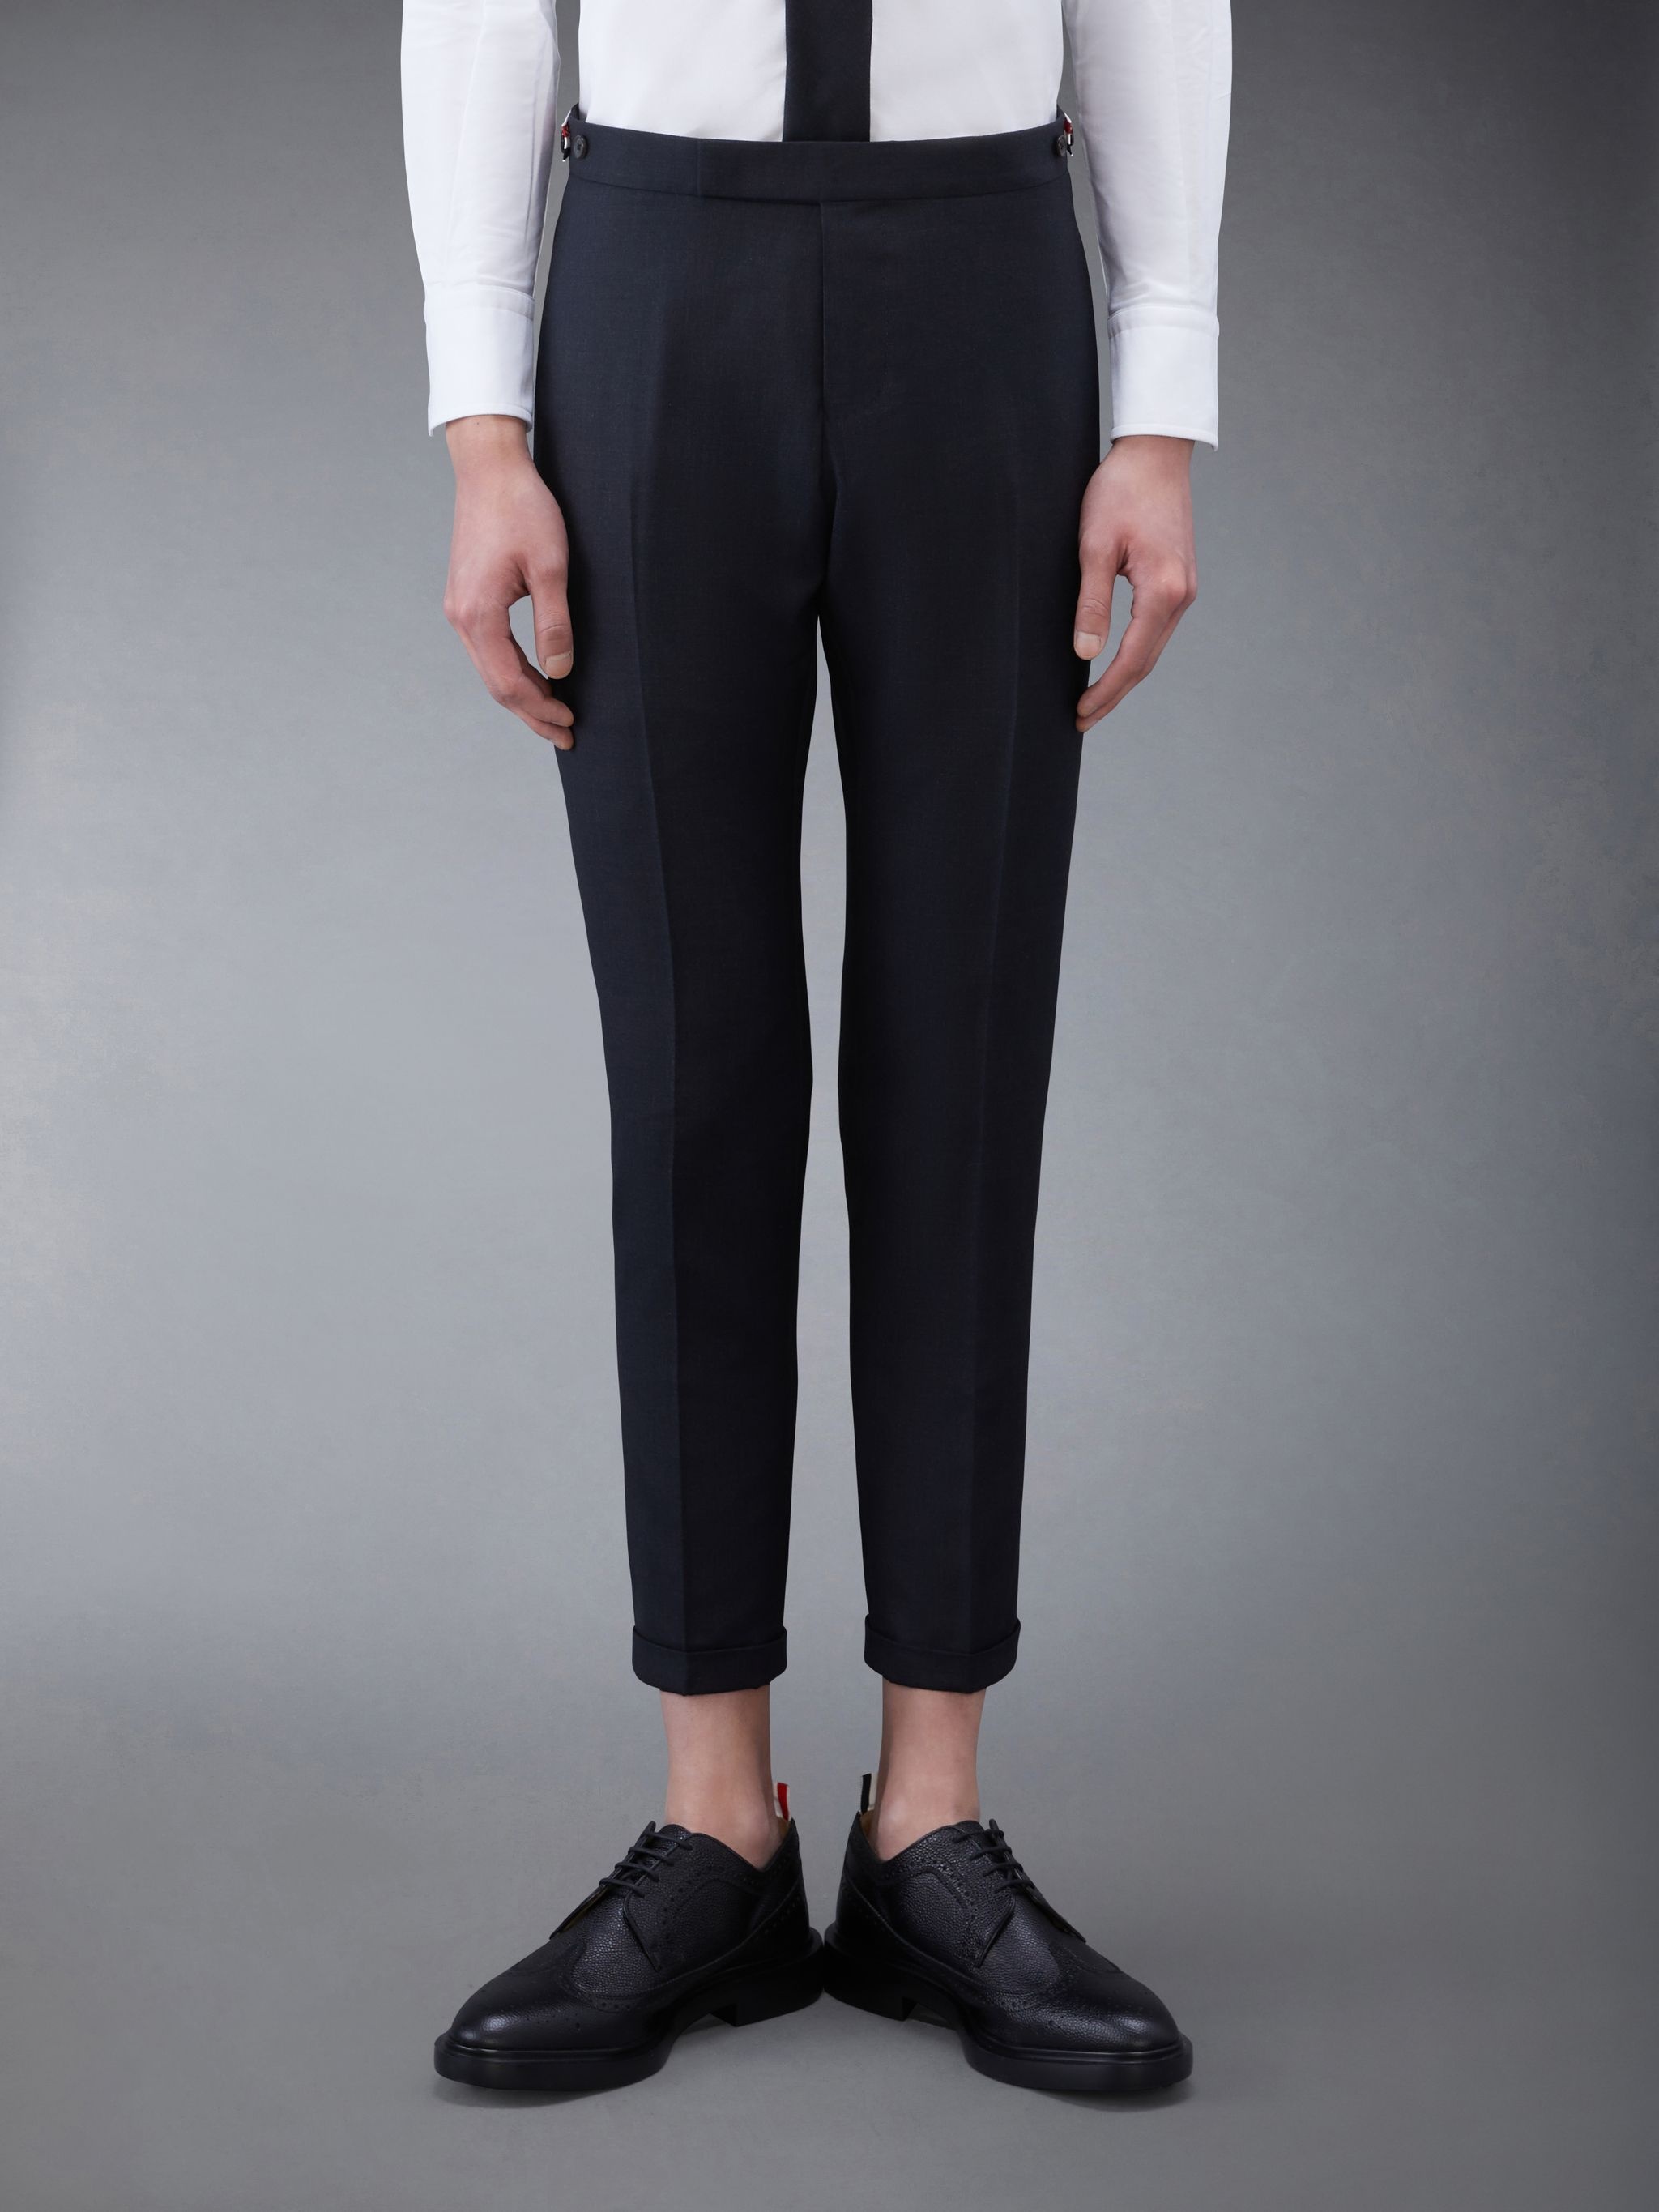 CHARCOAL GREY SUPER 120S TWILL HIGH ARMHOLE SUIT WITH TIE AND LOW RISE SKINNY TROUSER - 6